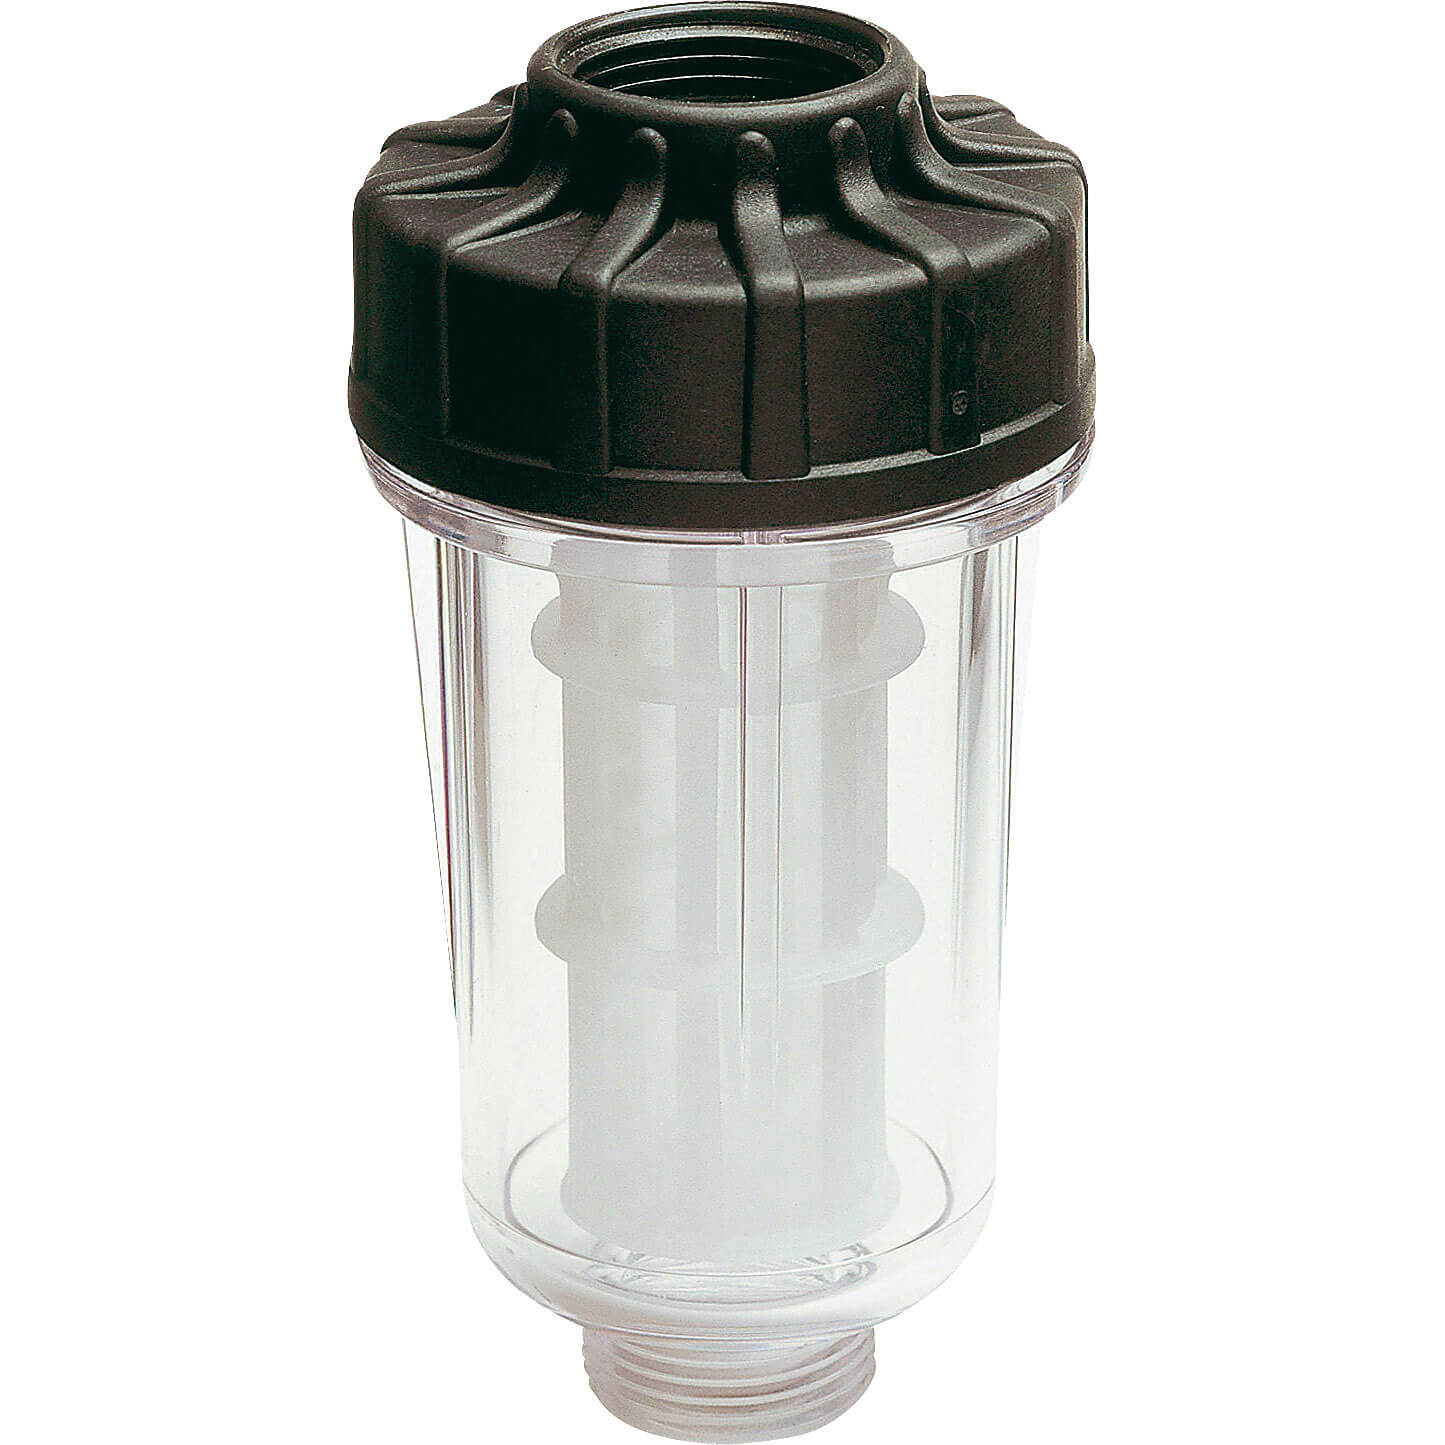 Image of Bosch Water Filter for GHP Pressure Washers